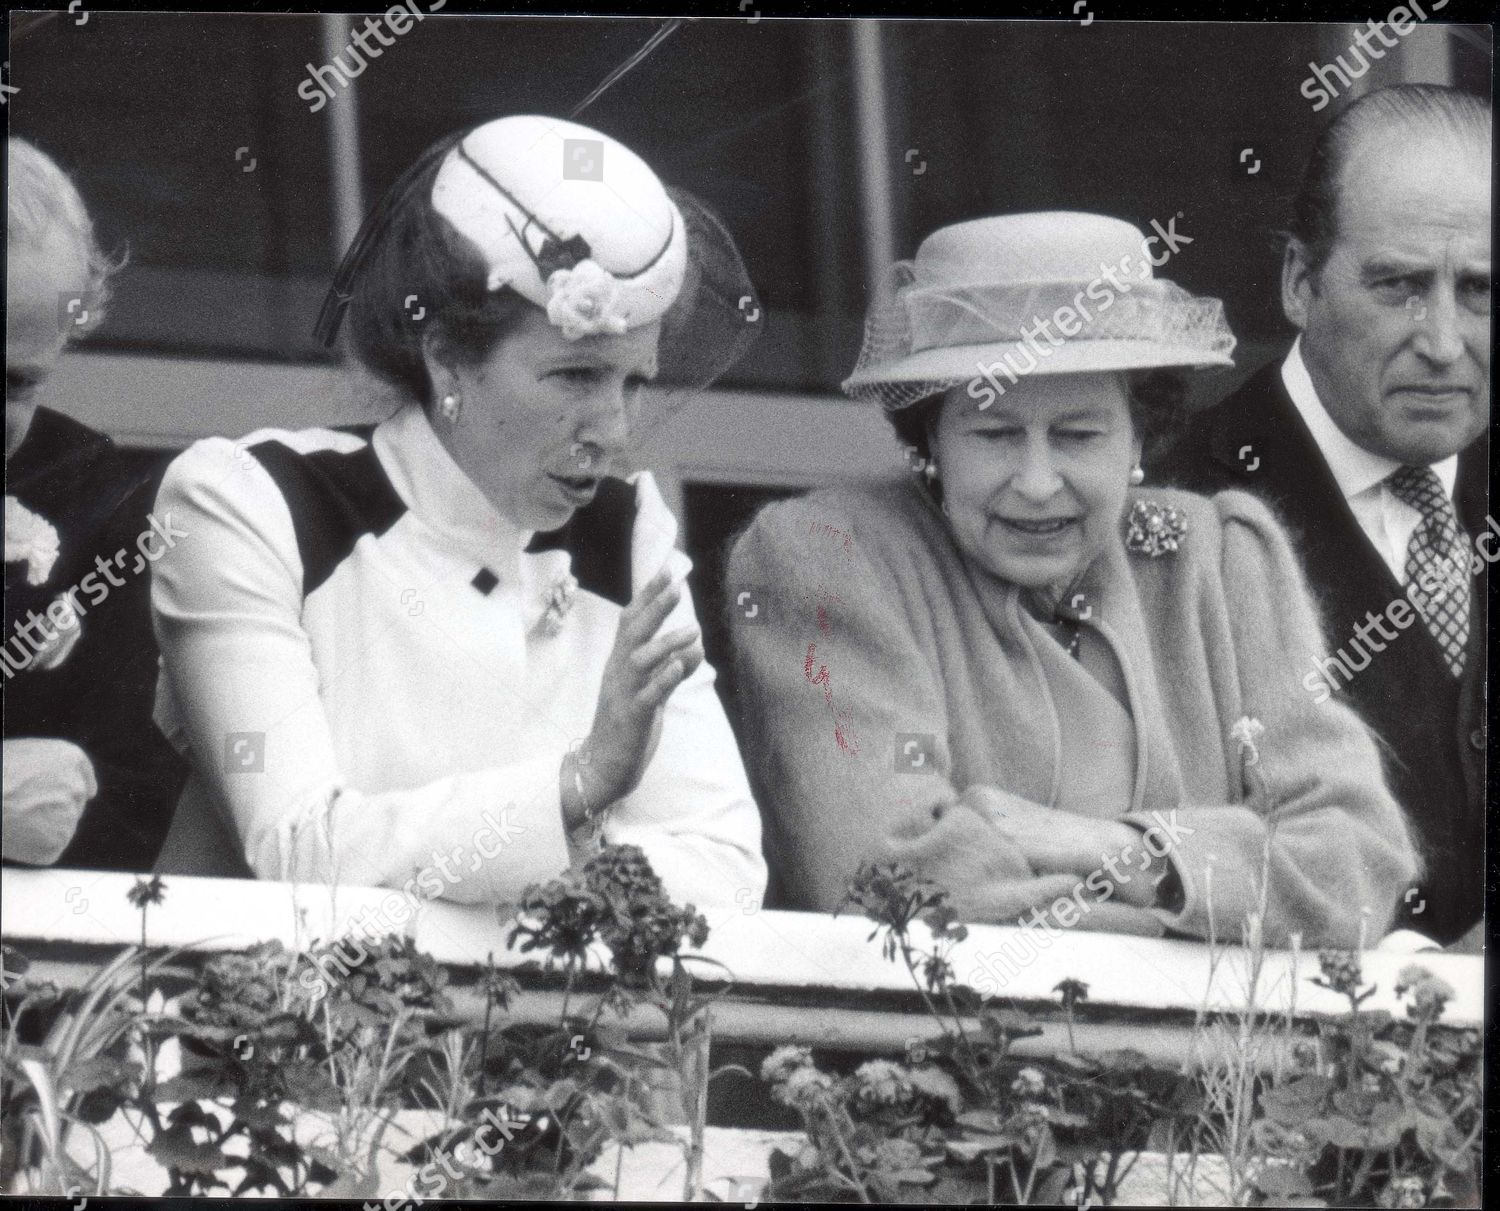 royal-family-racing-at-epsom-1985-queen-and-princess-anne-in-the-stand-before-the-derby-lord-porchester-dead-2001-on-the-right-shutterstock-editorial-1042771a.jpg